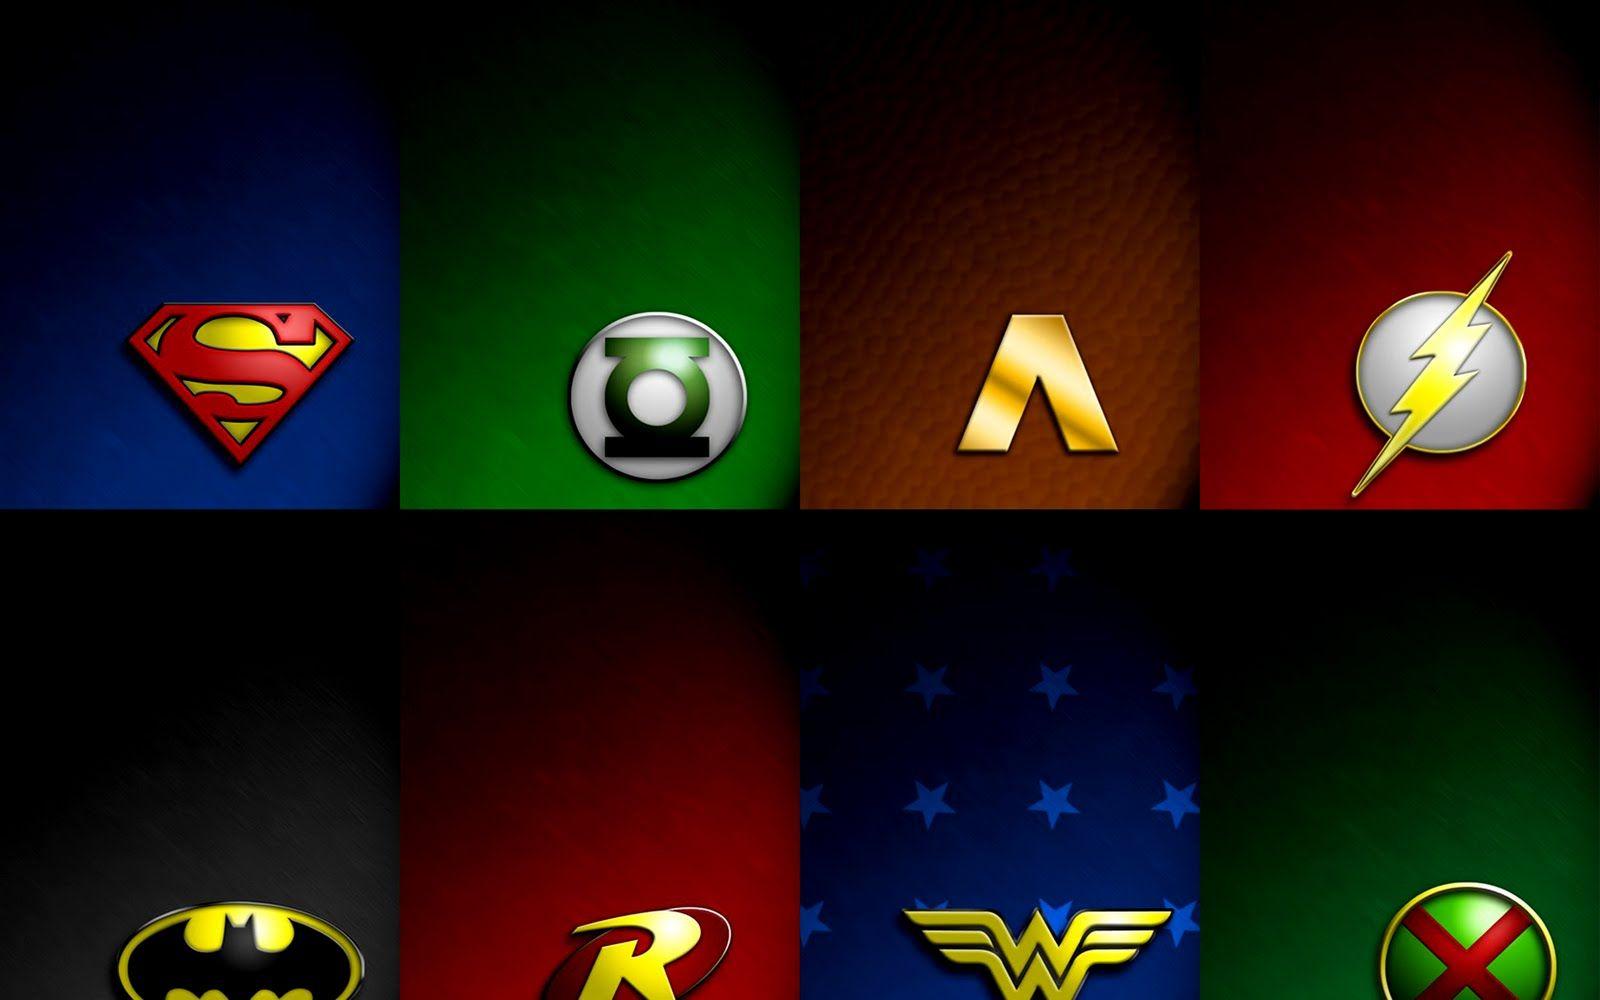 superheroes logo wallpaper. Camera Webfreind. Projects to Try